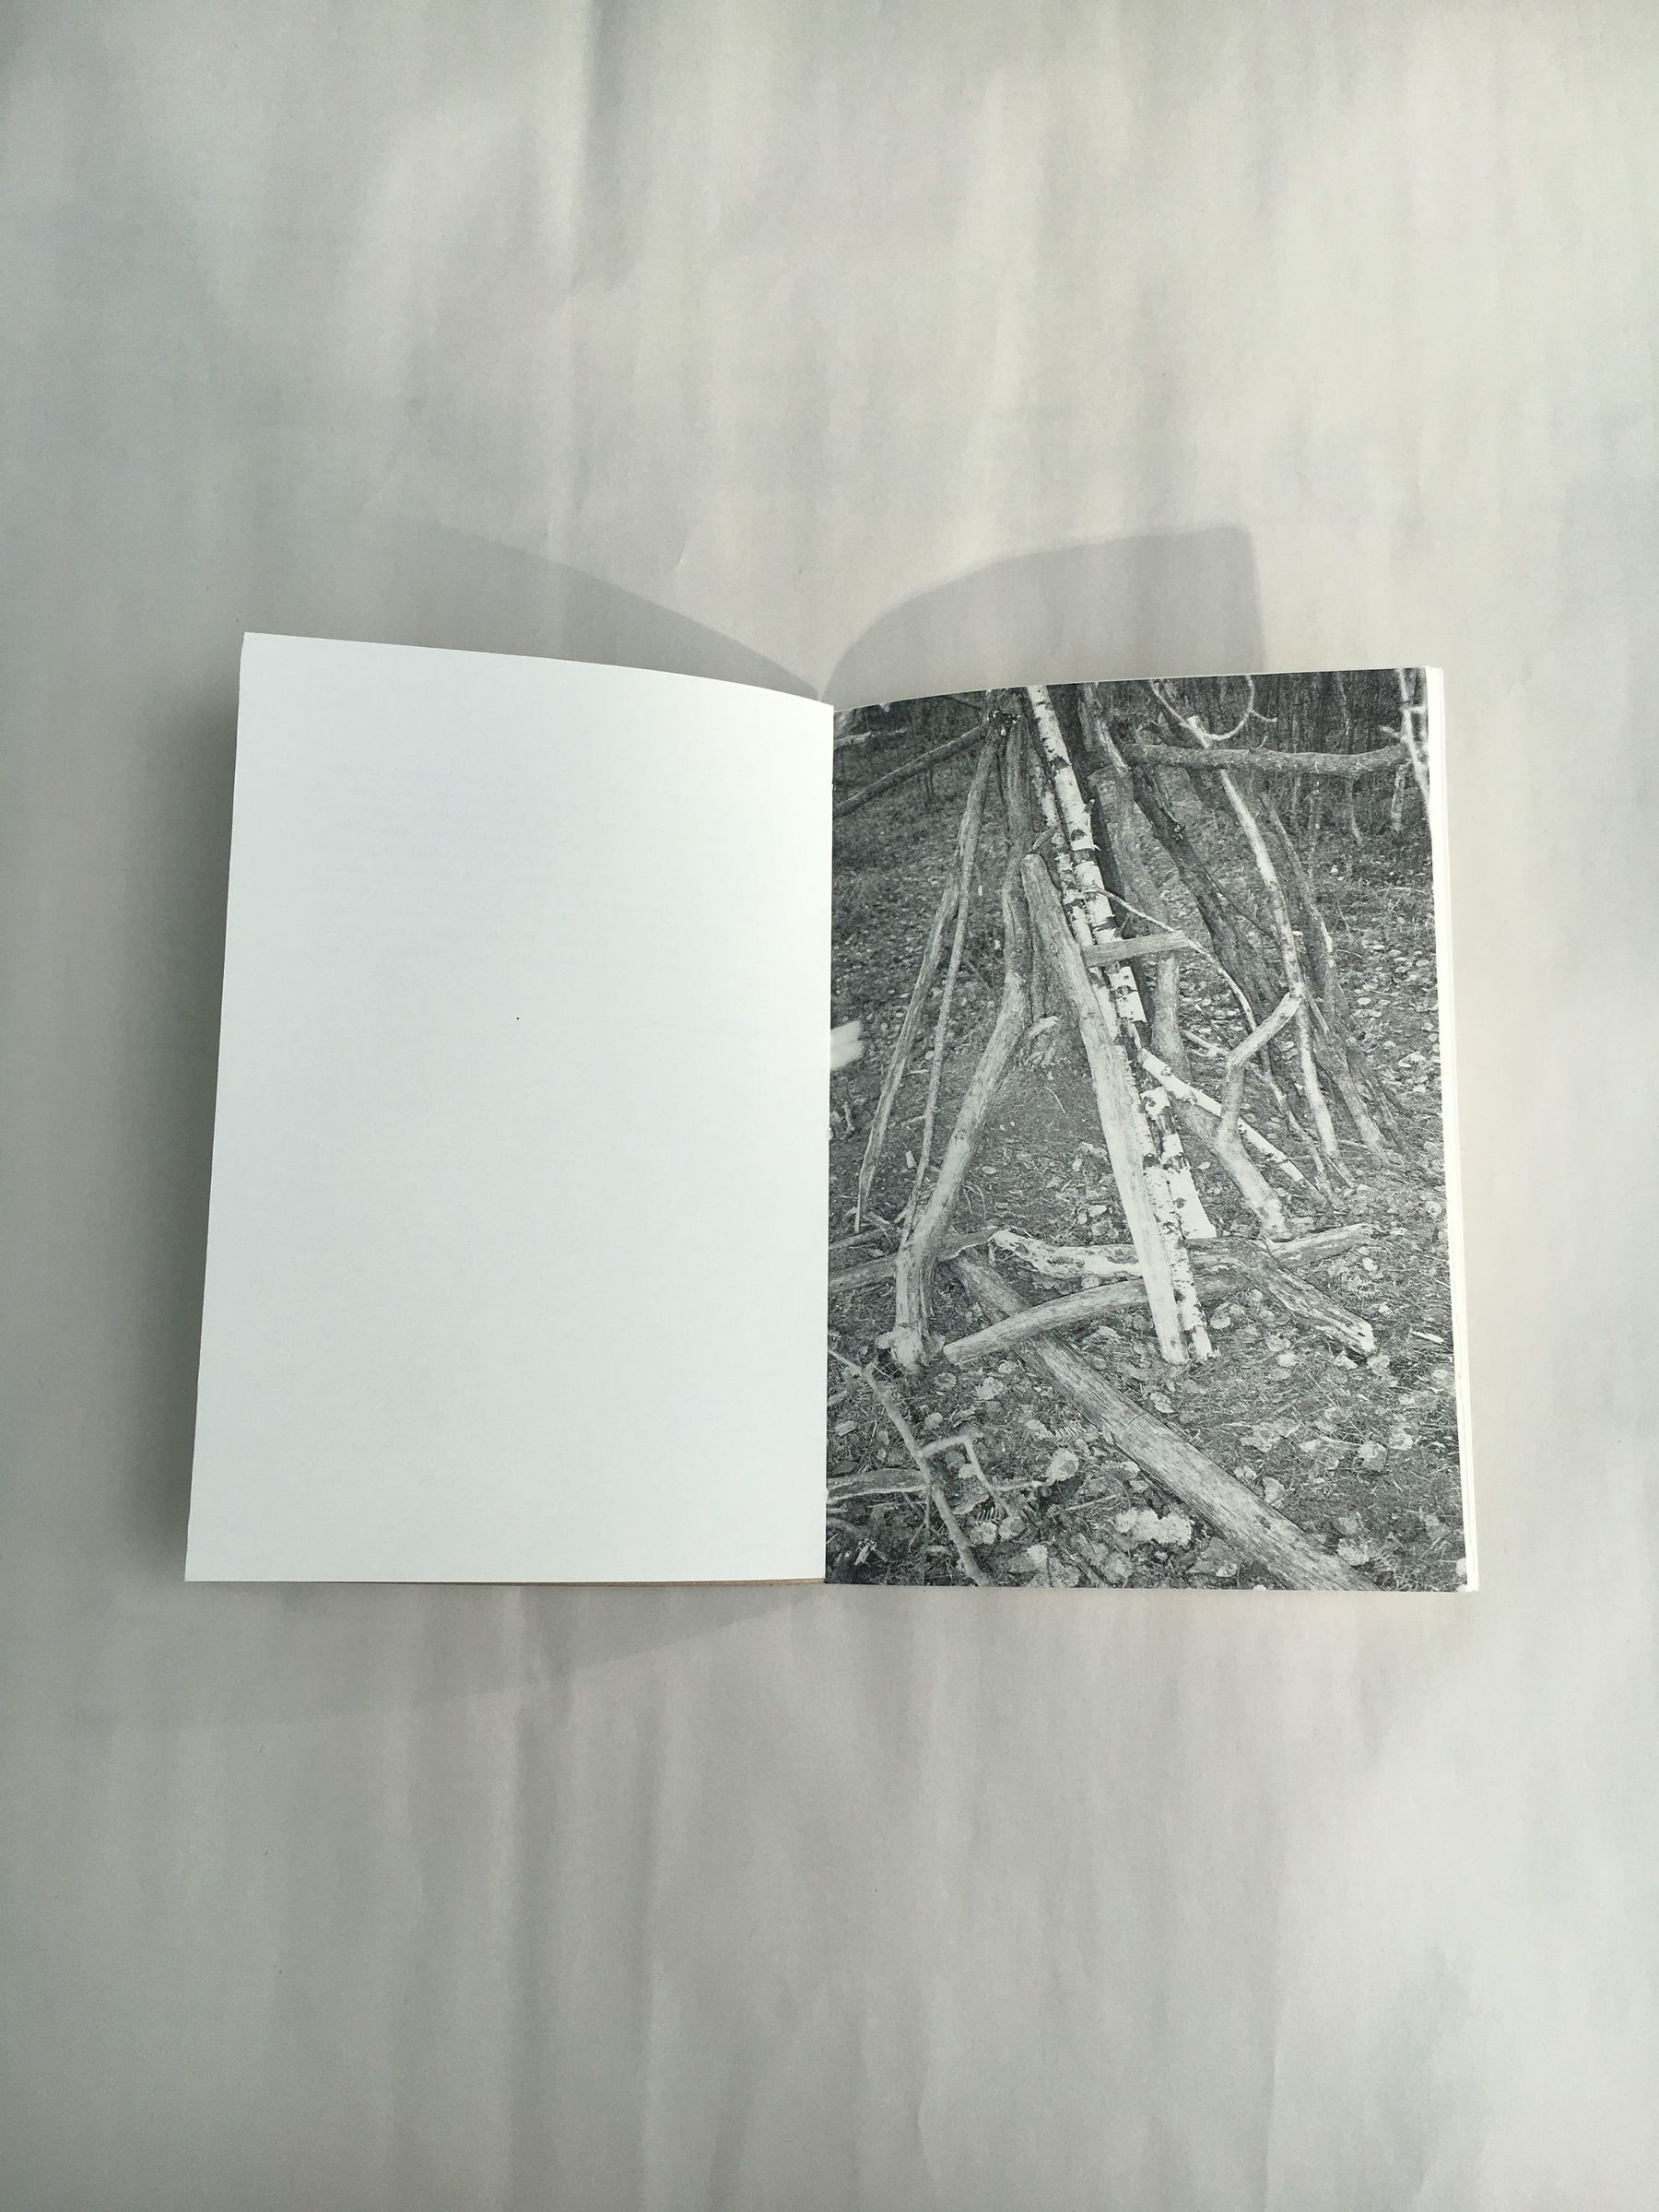 Image of the book The Waiting Room (Practising Building a Nest) against white paper. The book lays open at a page with a black and white image of branches piled together to make a shelter